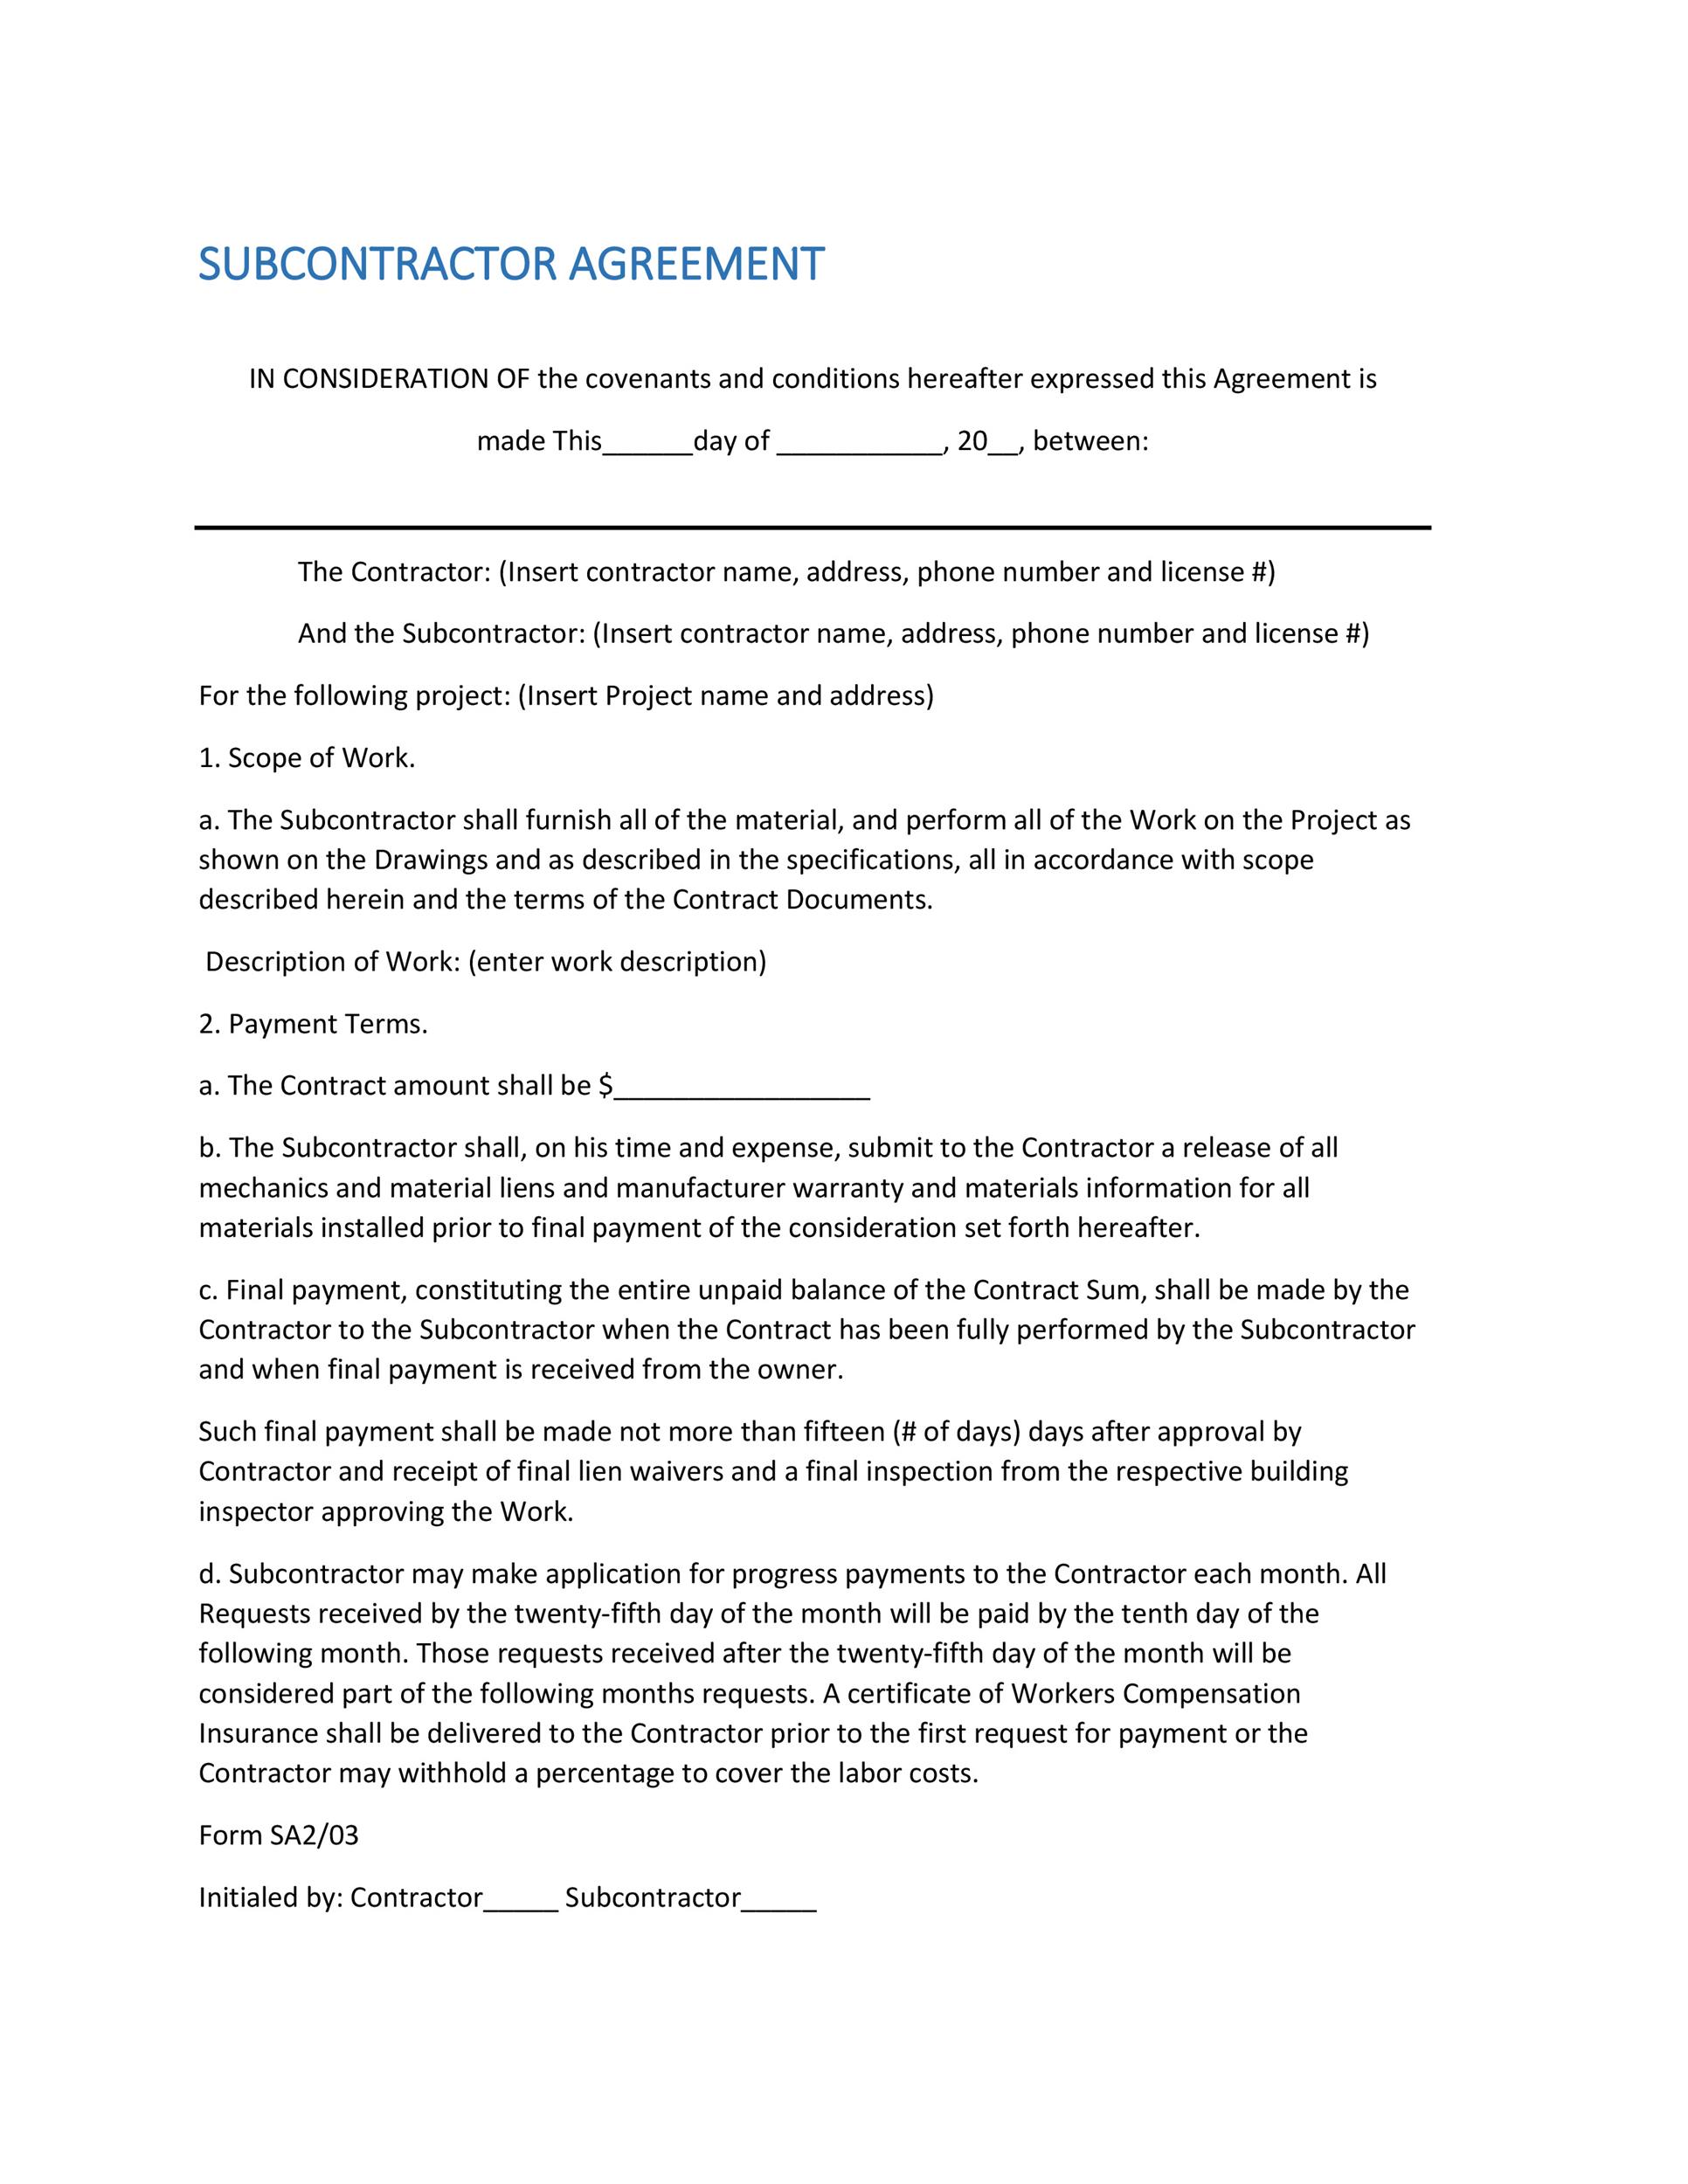 need-a-subcontractor-agreement-39-free-templates-here